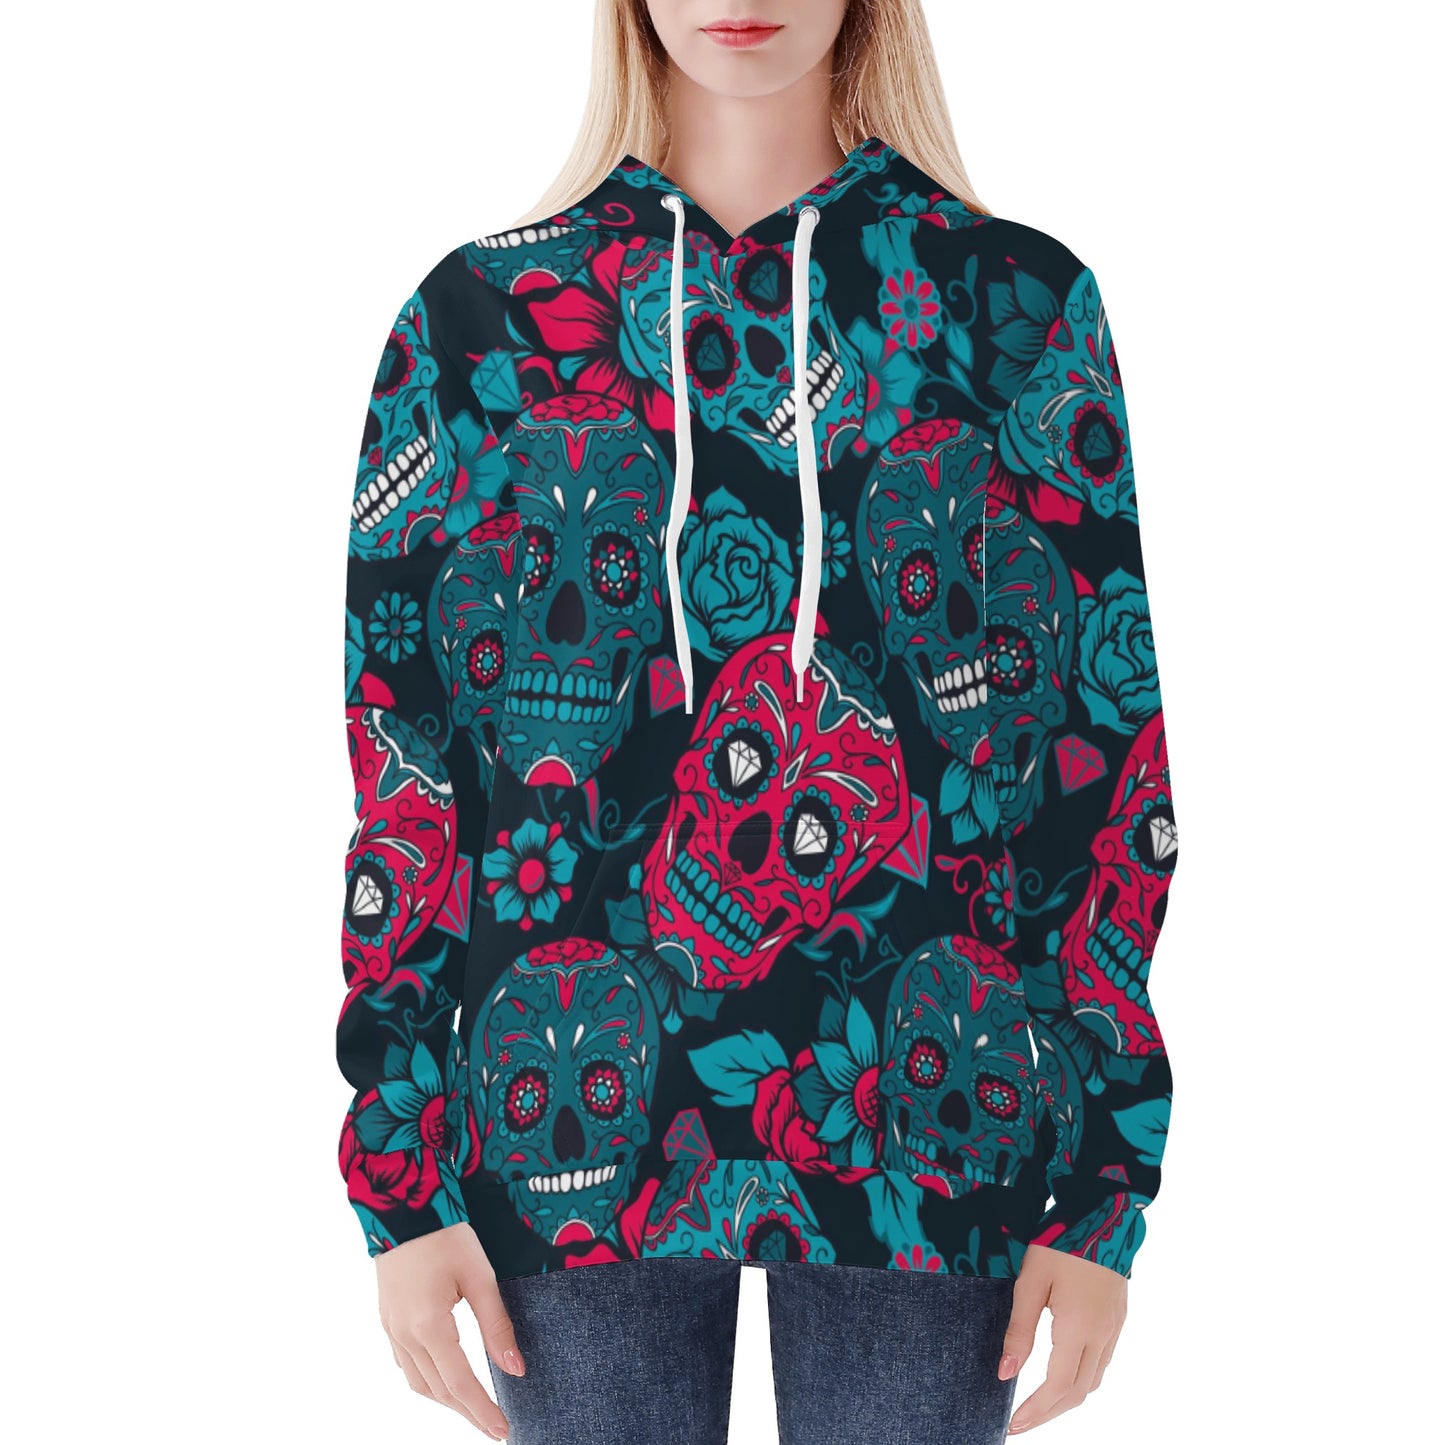 Calaveras Mexican skull Women's All Over Print Hoodie